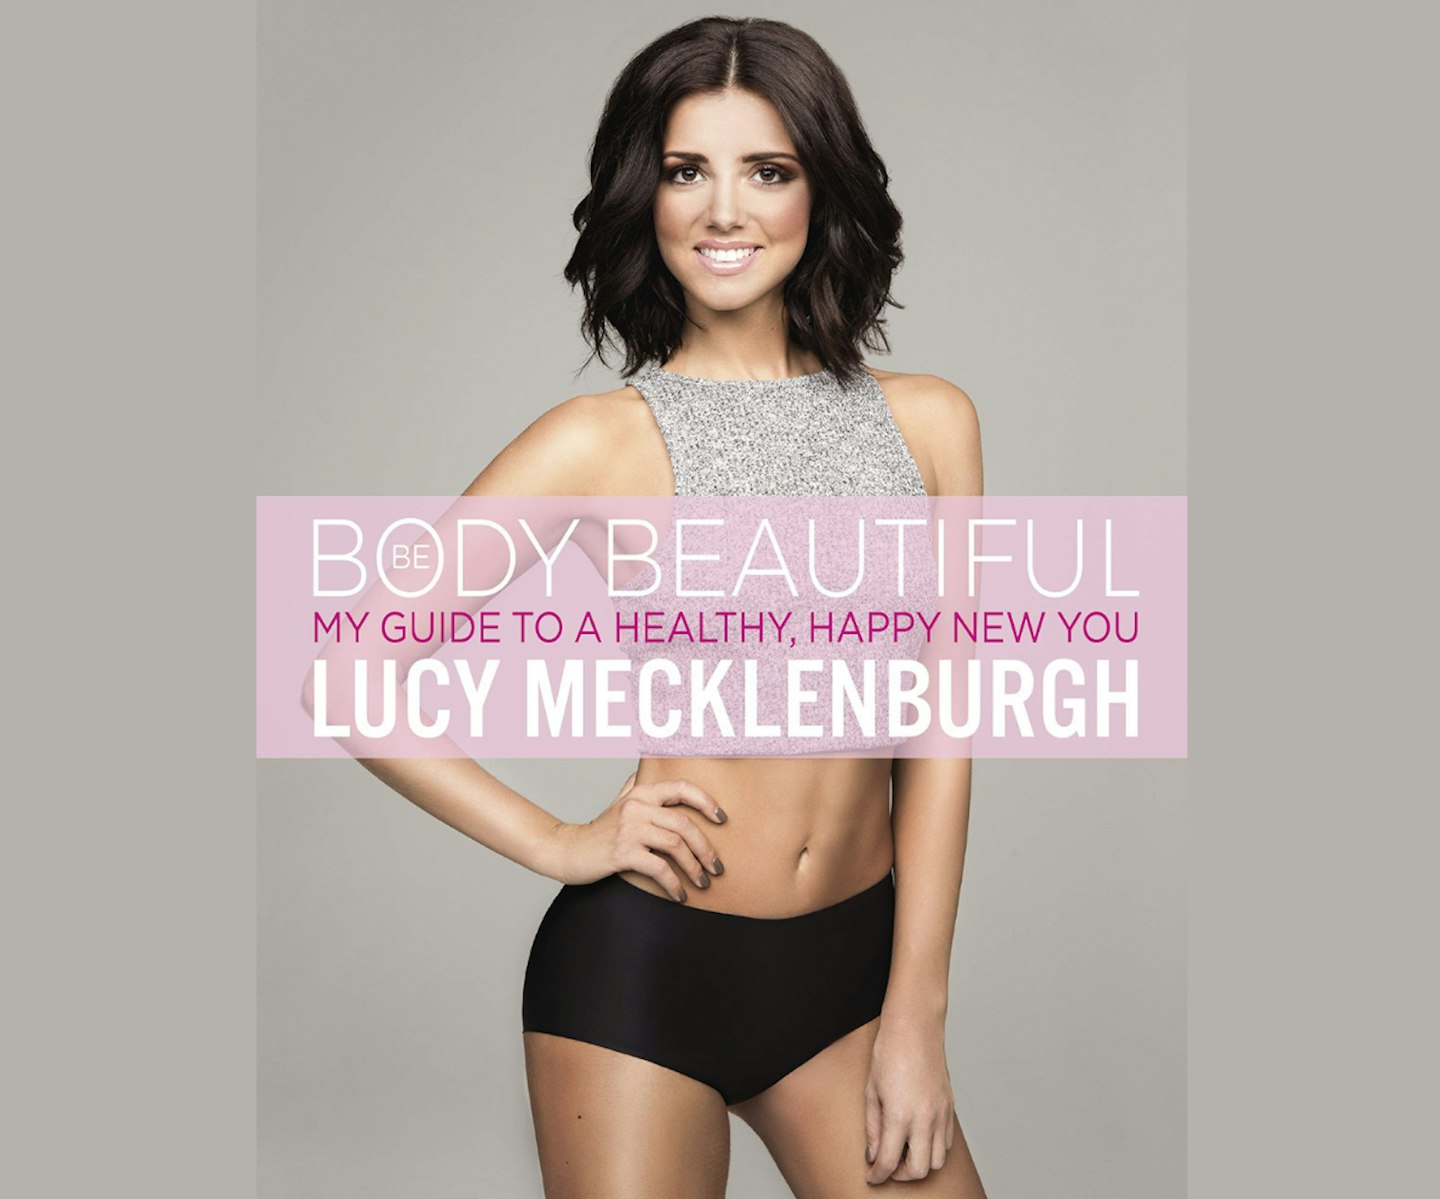 Be Body Beautiful: Look and feel your best with my guide to a healthy, happy new you.